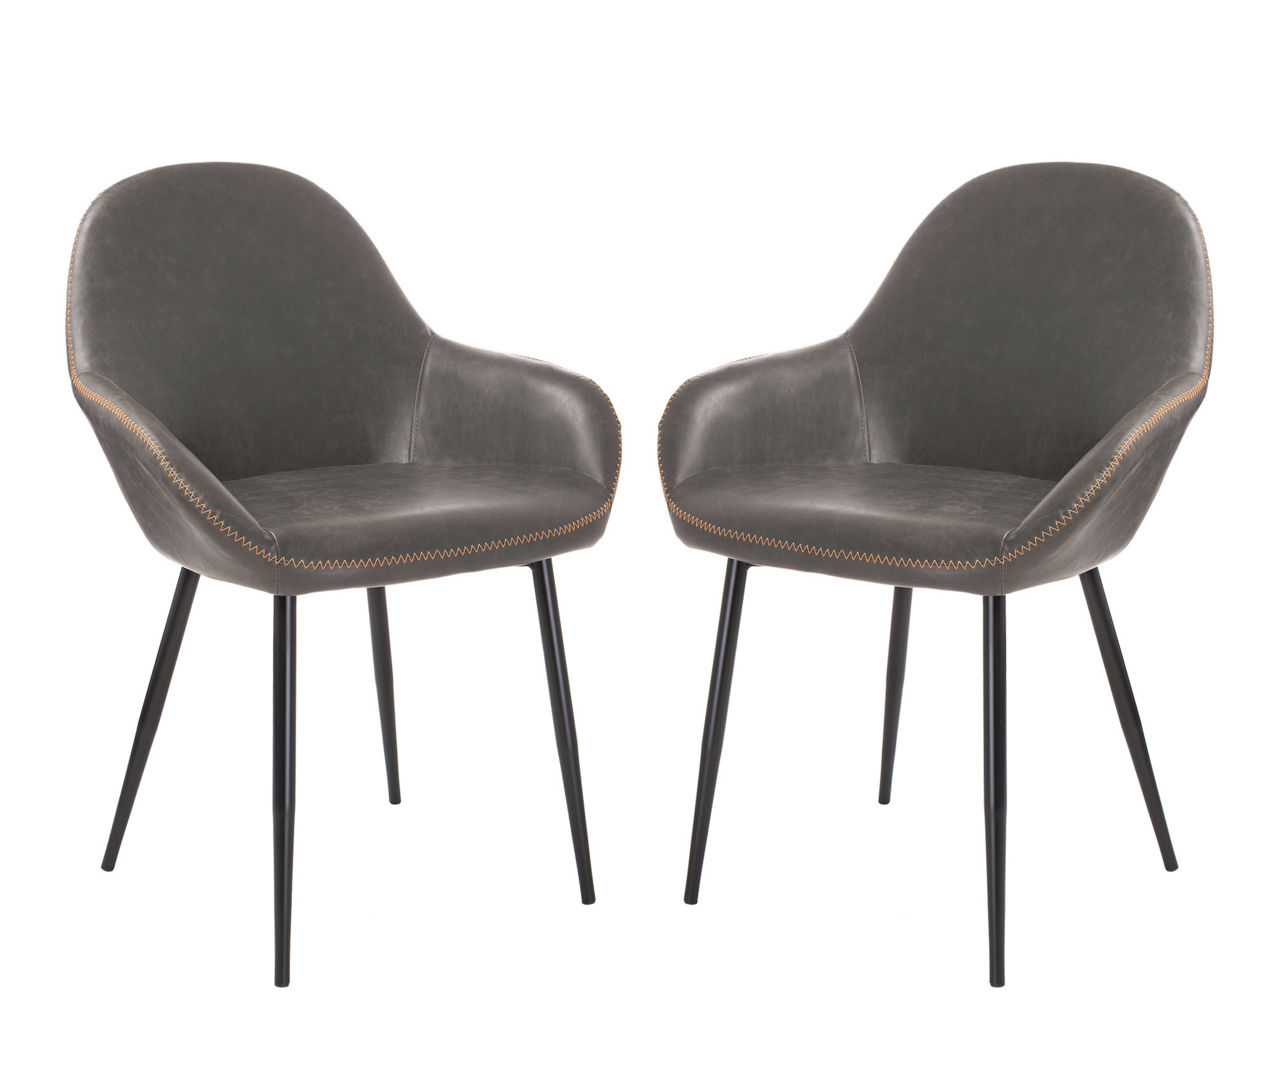 Mid-Century Modern Gray Faux Leather Dining Chairs, 2-Pack